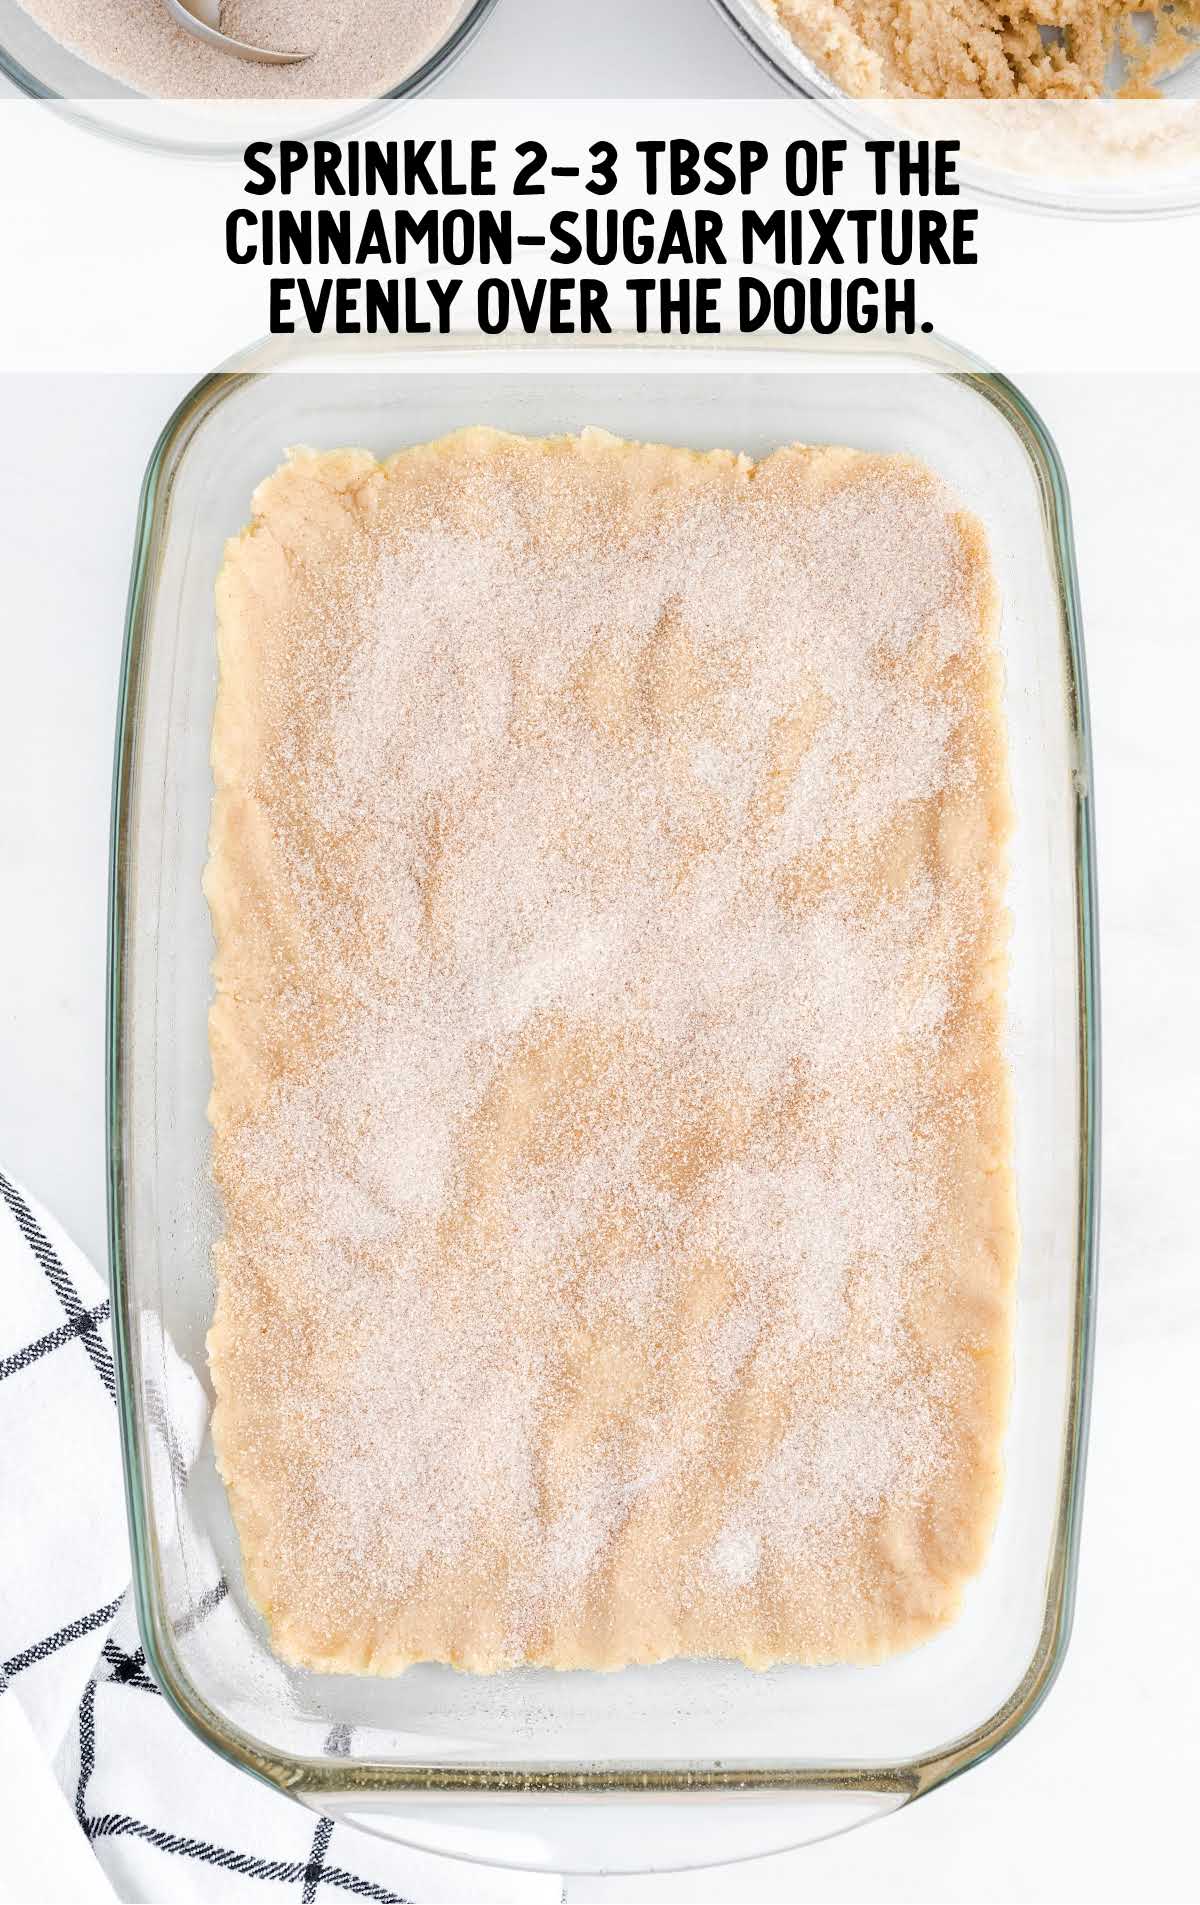 cinnamon sugar mixture sprinkled on top of the dough mixture in the baking dish